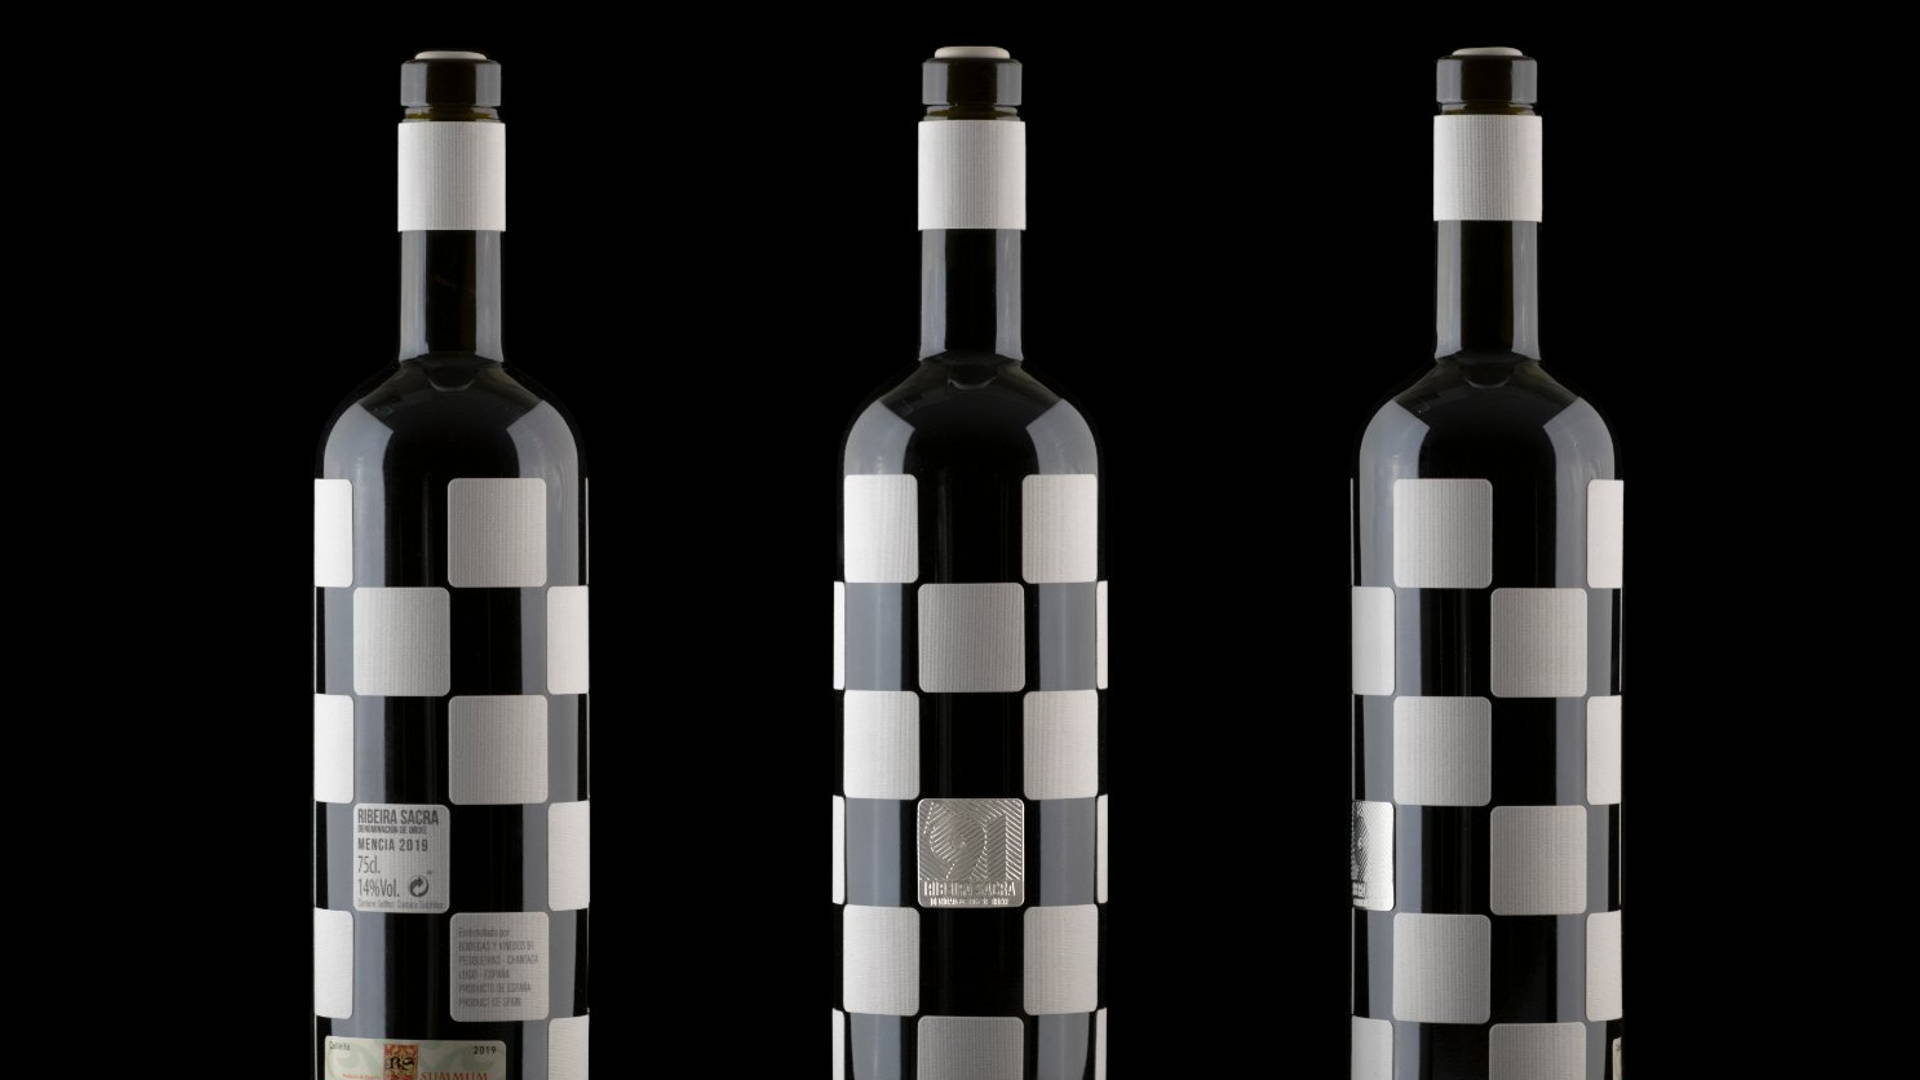 Featured image for '91 Checkmate Wine Label Meets the Bottle Just as the River Meets the Vineyard